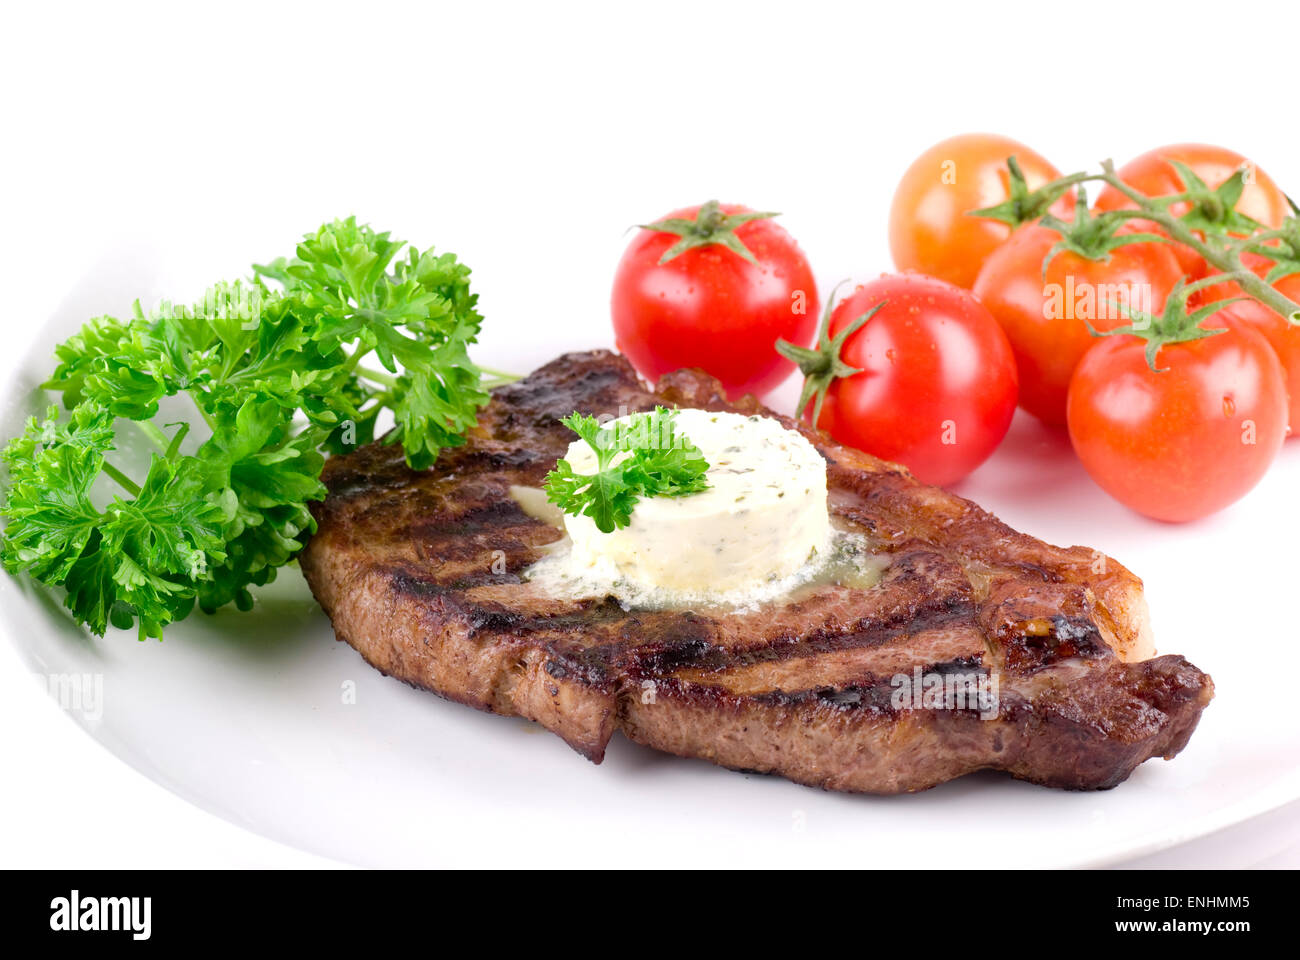 Strip steak with parsley butter on a white plate. Parsley and tomatoes garnish. Stock Photo